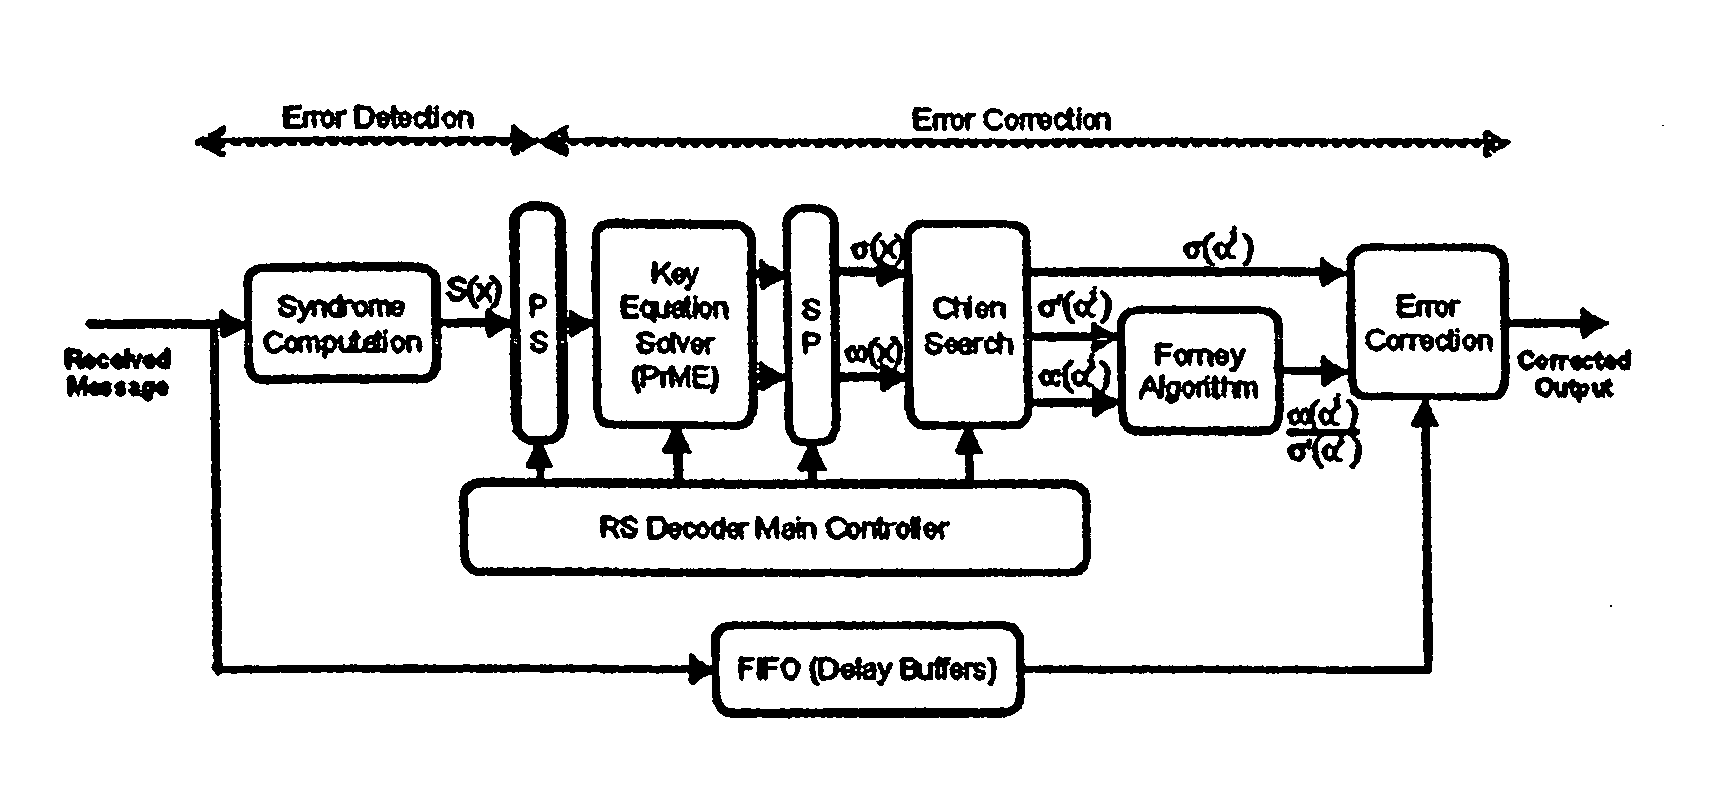 Reed-solomon decoder systems for high speed communication and data storage applications